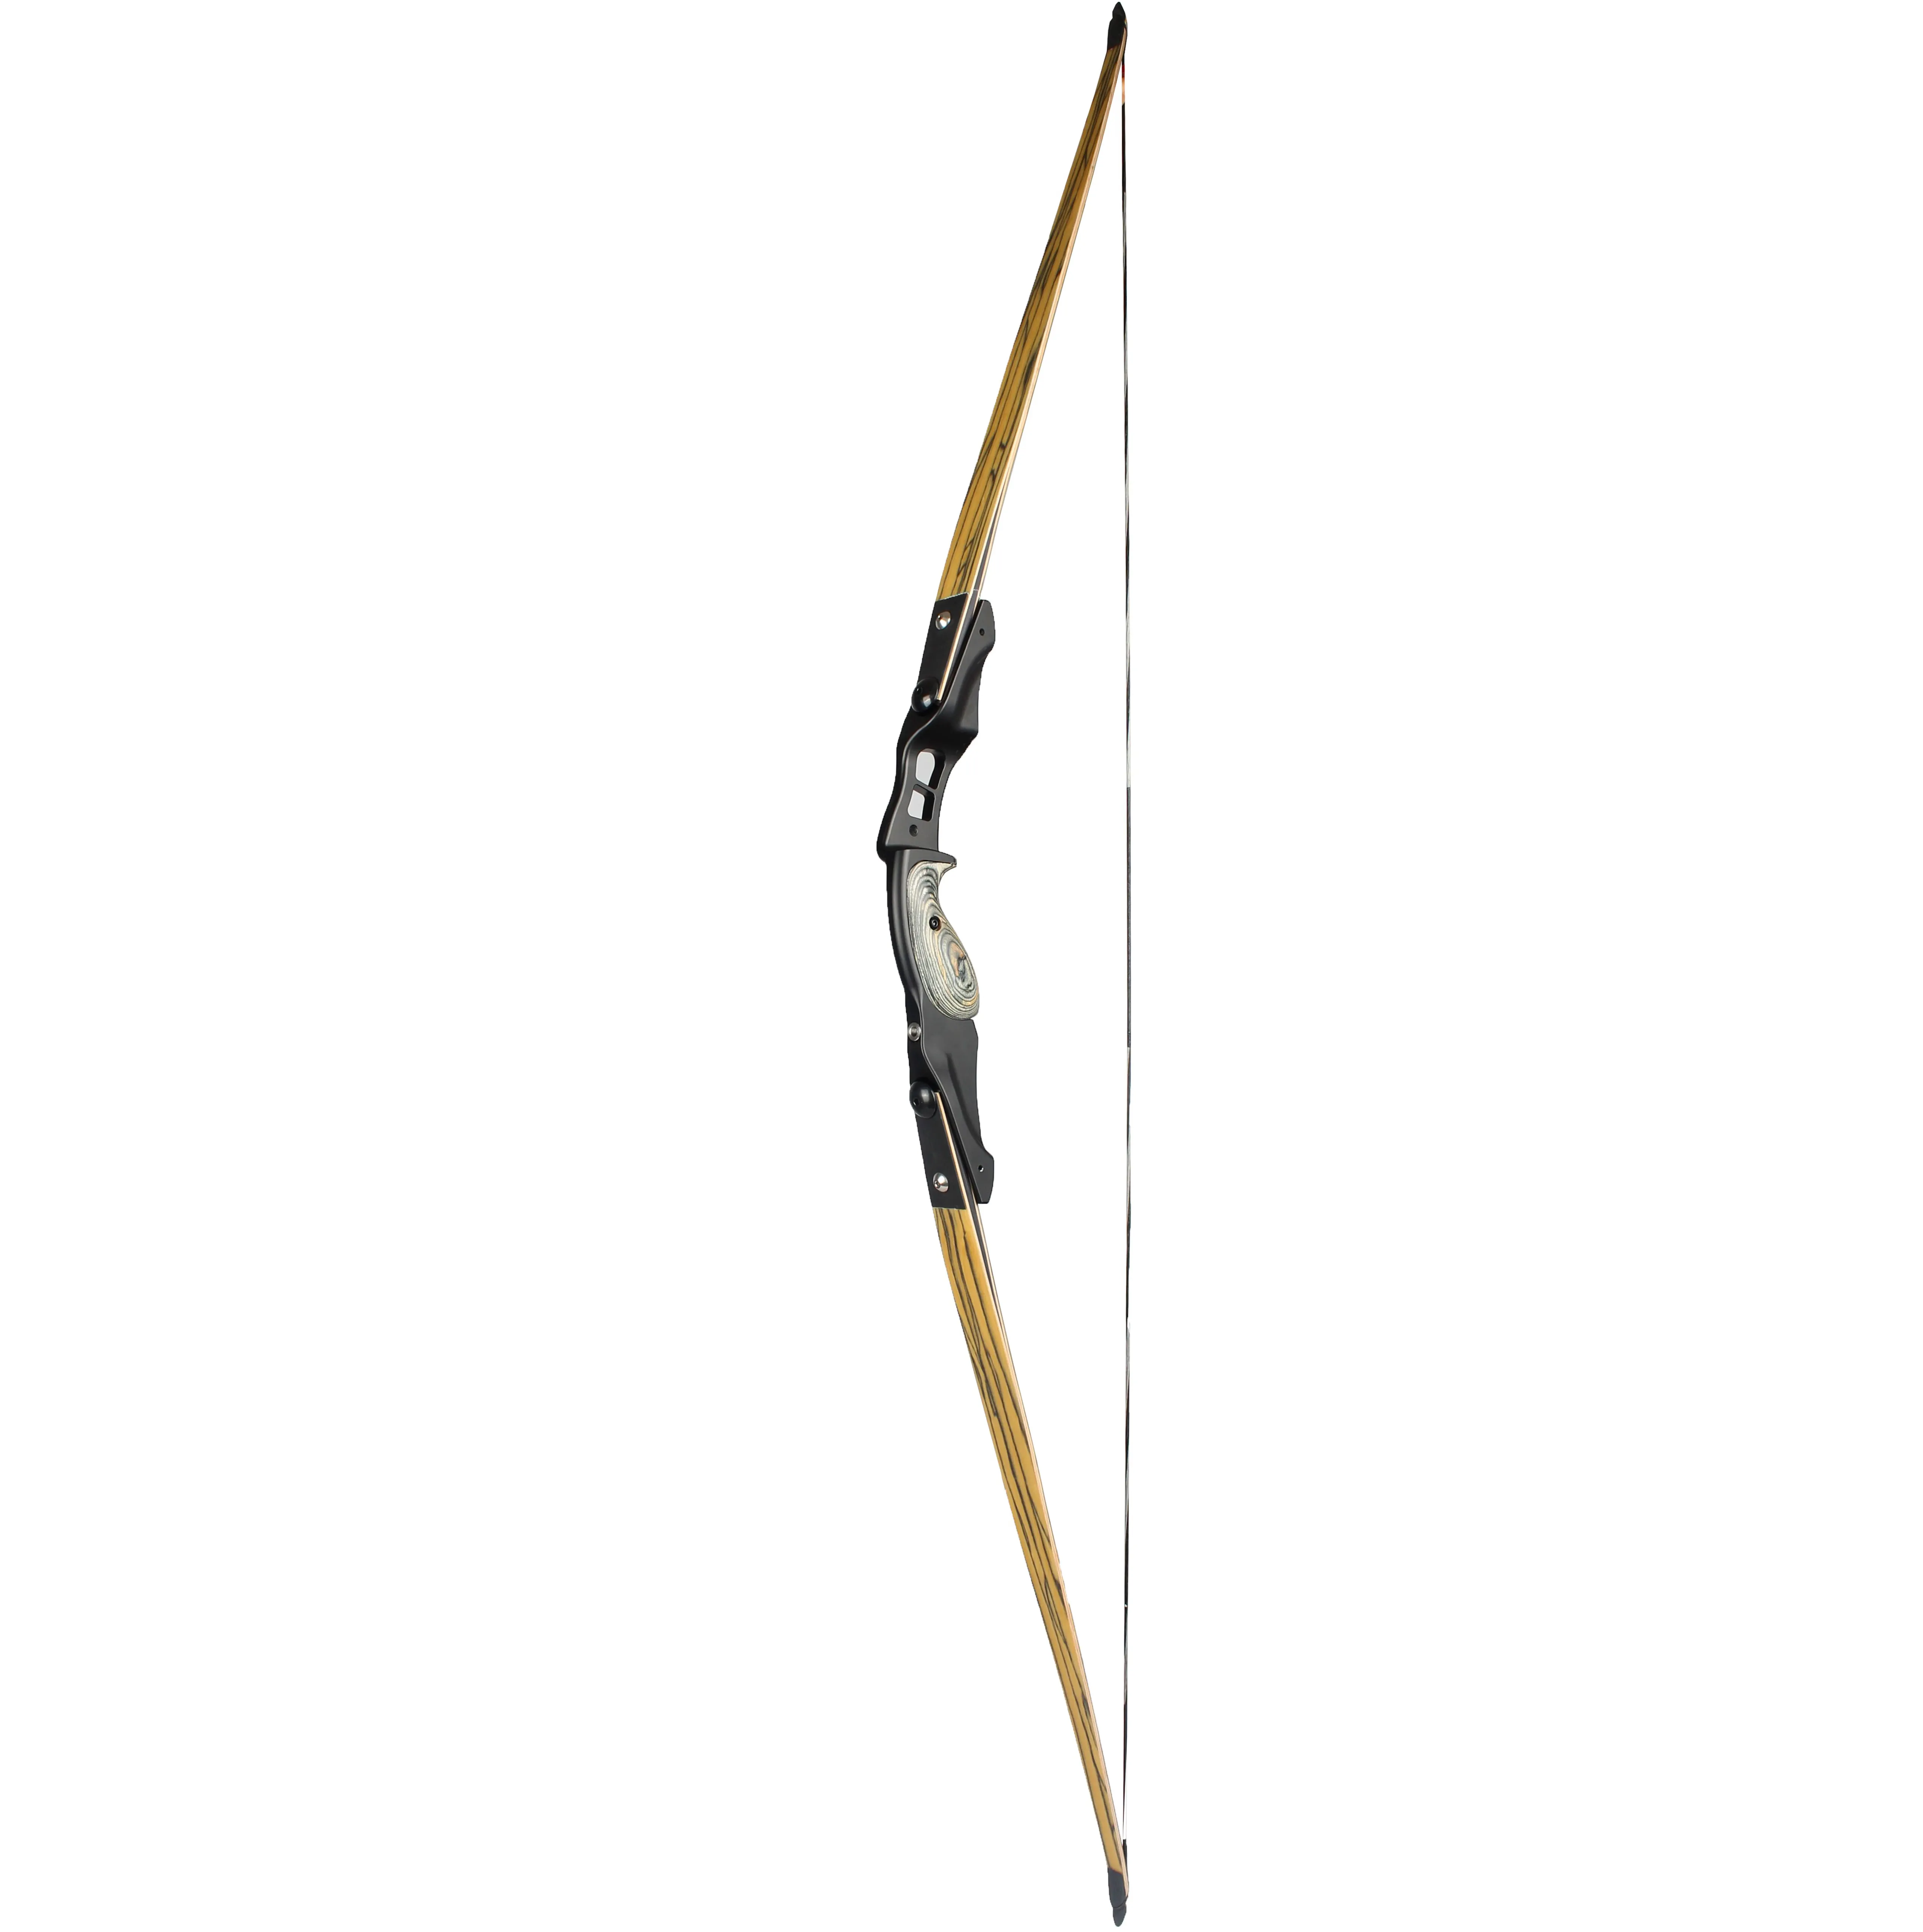 ZS-F162 Hunting Fishing Competition ILF traditional Long Bow for shooting Archery Aluminum Riser Laminated Limbs Factory Price